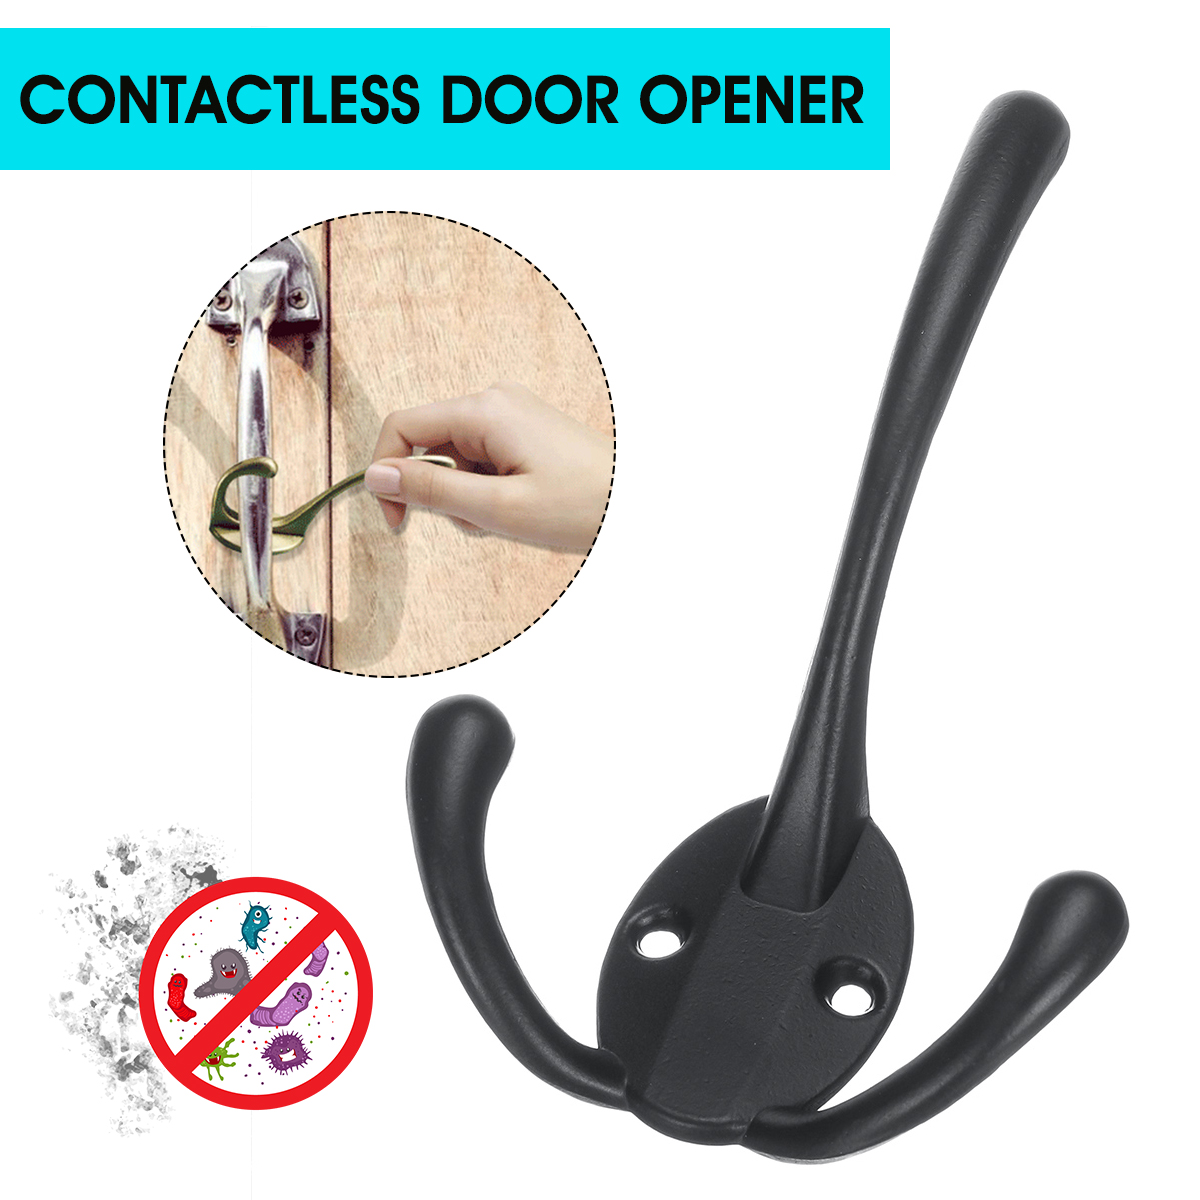 Black-Metal-Contactless-Safety-Hygiene-Door-Opener-NO-Touch-Key-for-Hand-1681855-3